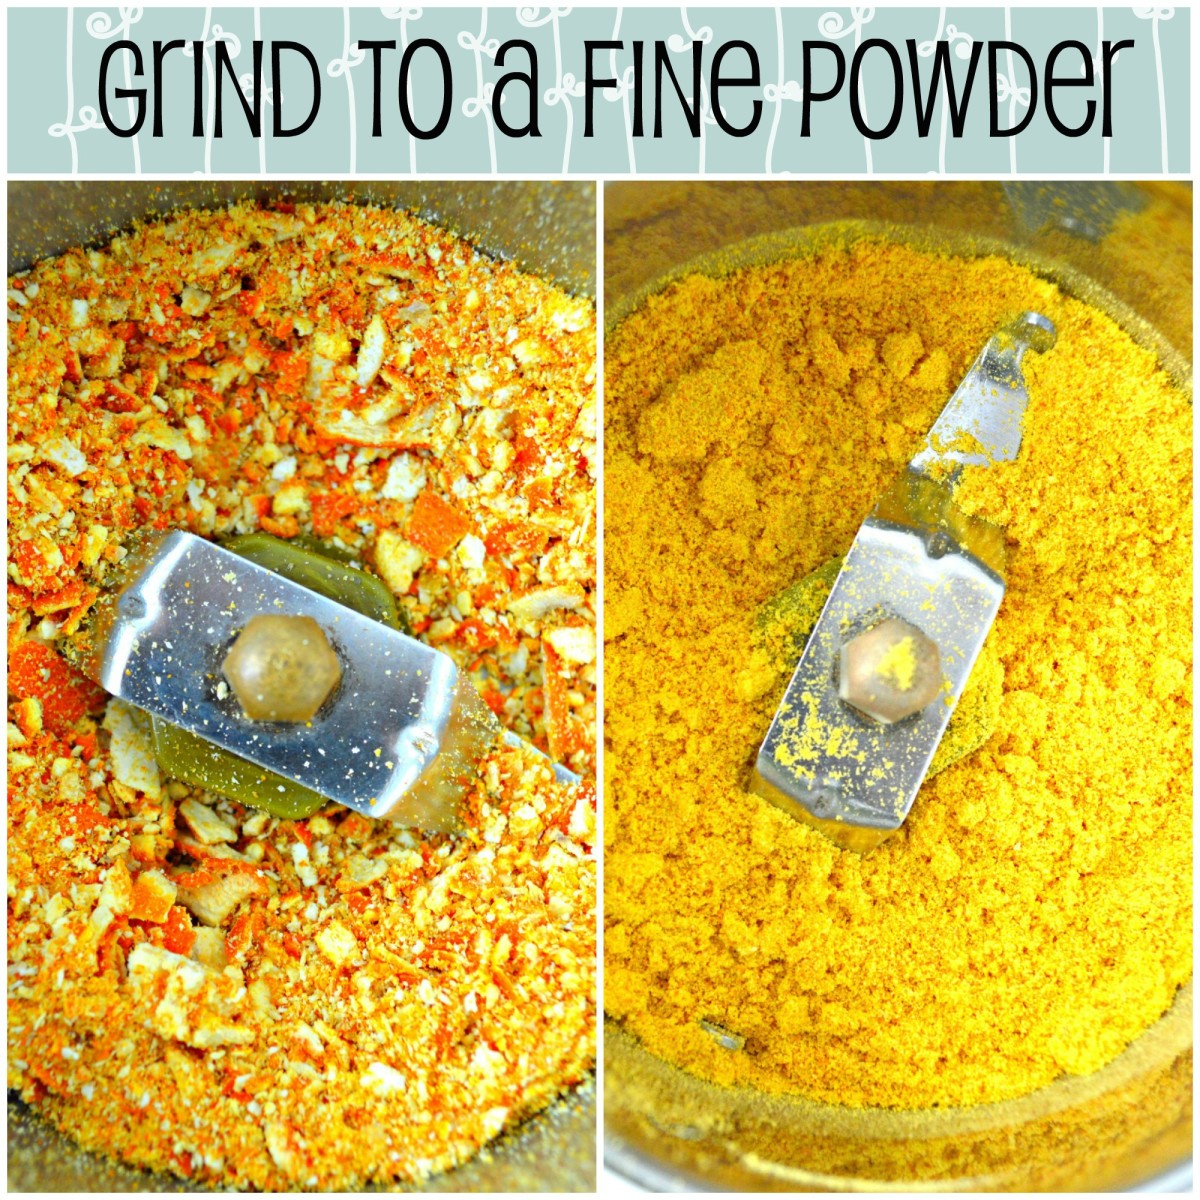 Start grinding the peel in your food processor. The first picture shows the peels after 3 pulses. The second picture shows the finely powdered peel, after about 40 seconds of grinding.